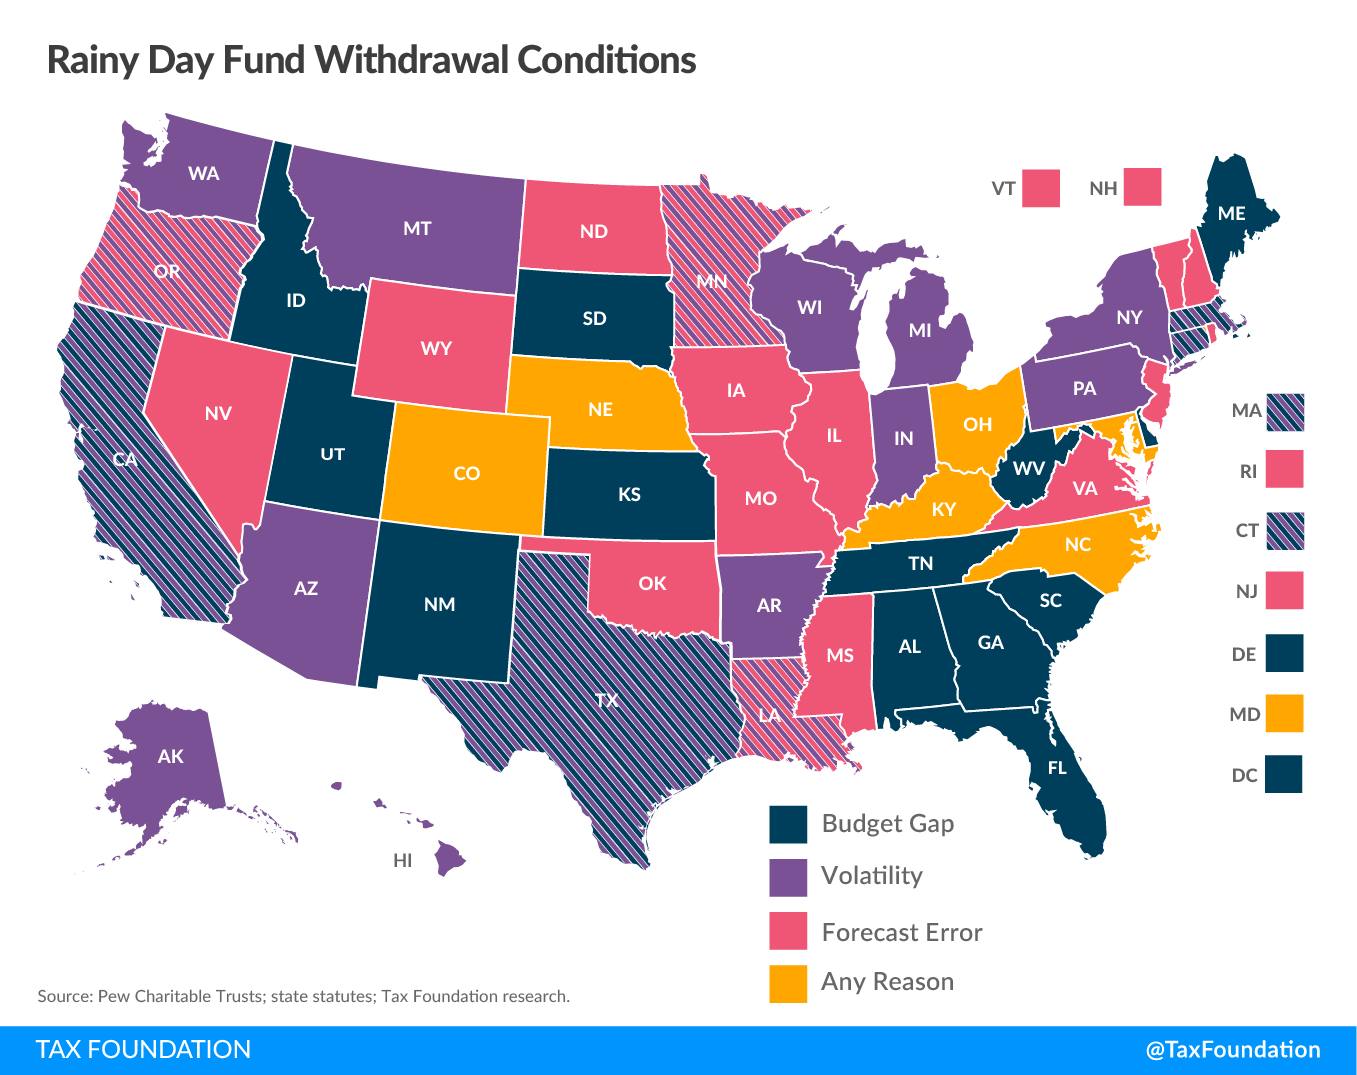 Under What Conditions Can a Rainy Day Fund Be Accessed? State Rainy Day Fund Withdrawal Conditions